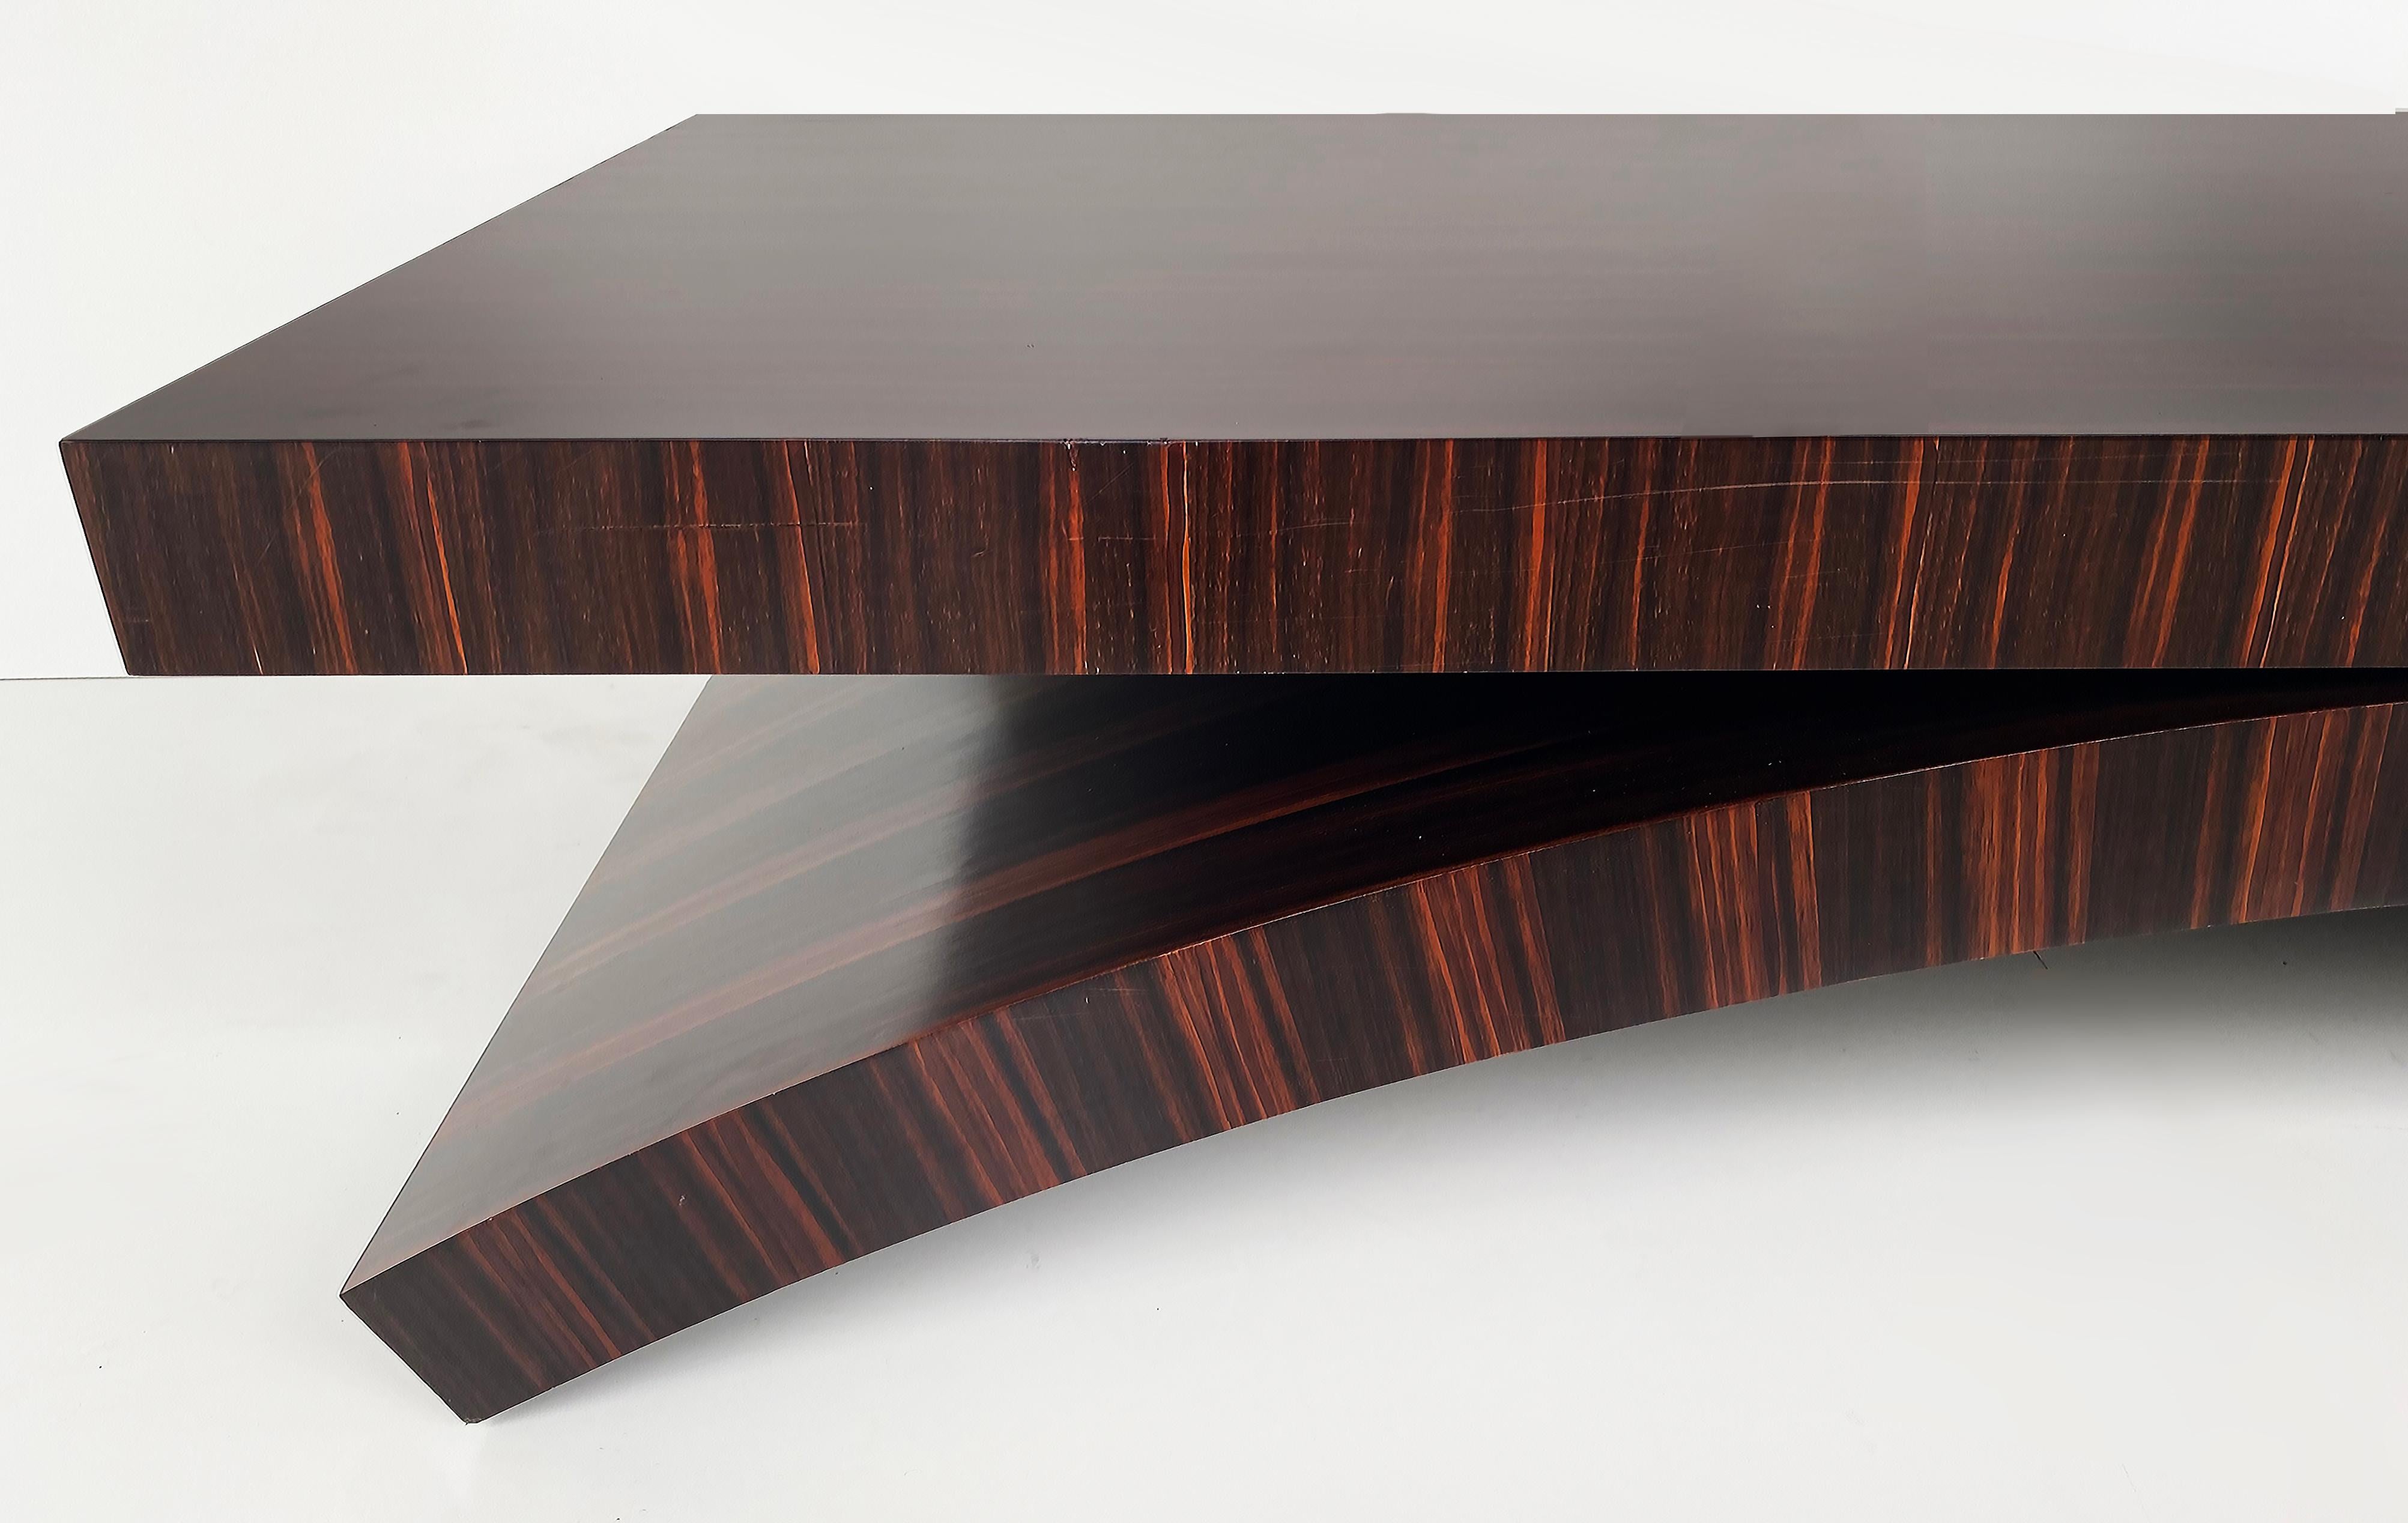 American Michael Vanderbyl Boiler Macassar Ebony Arch Coffee Table, Large Size  For Sale